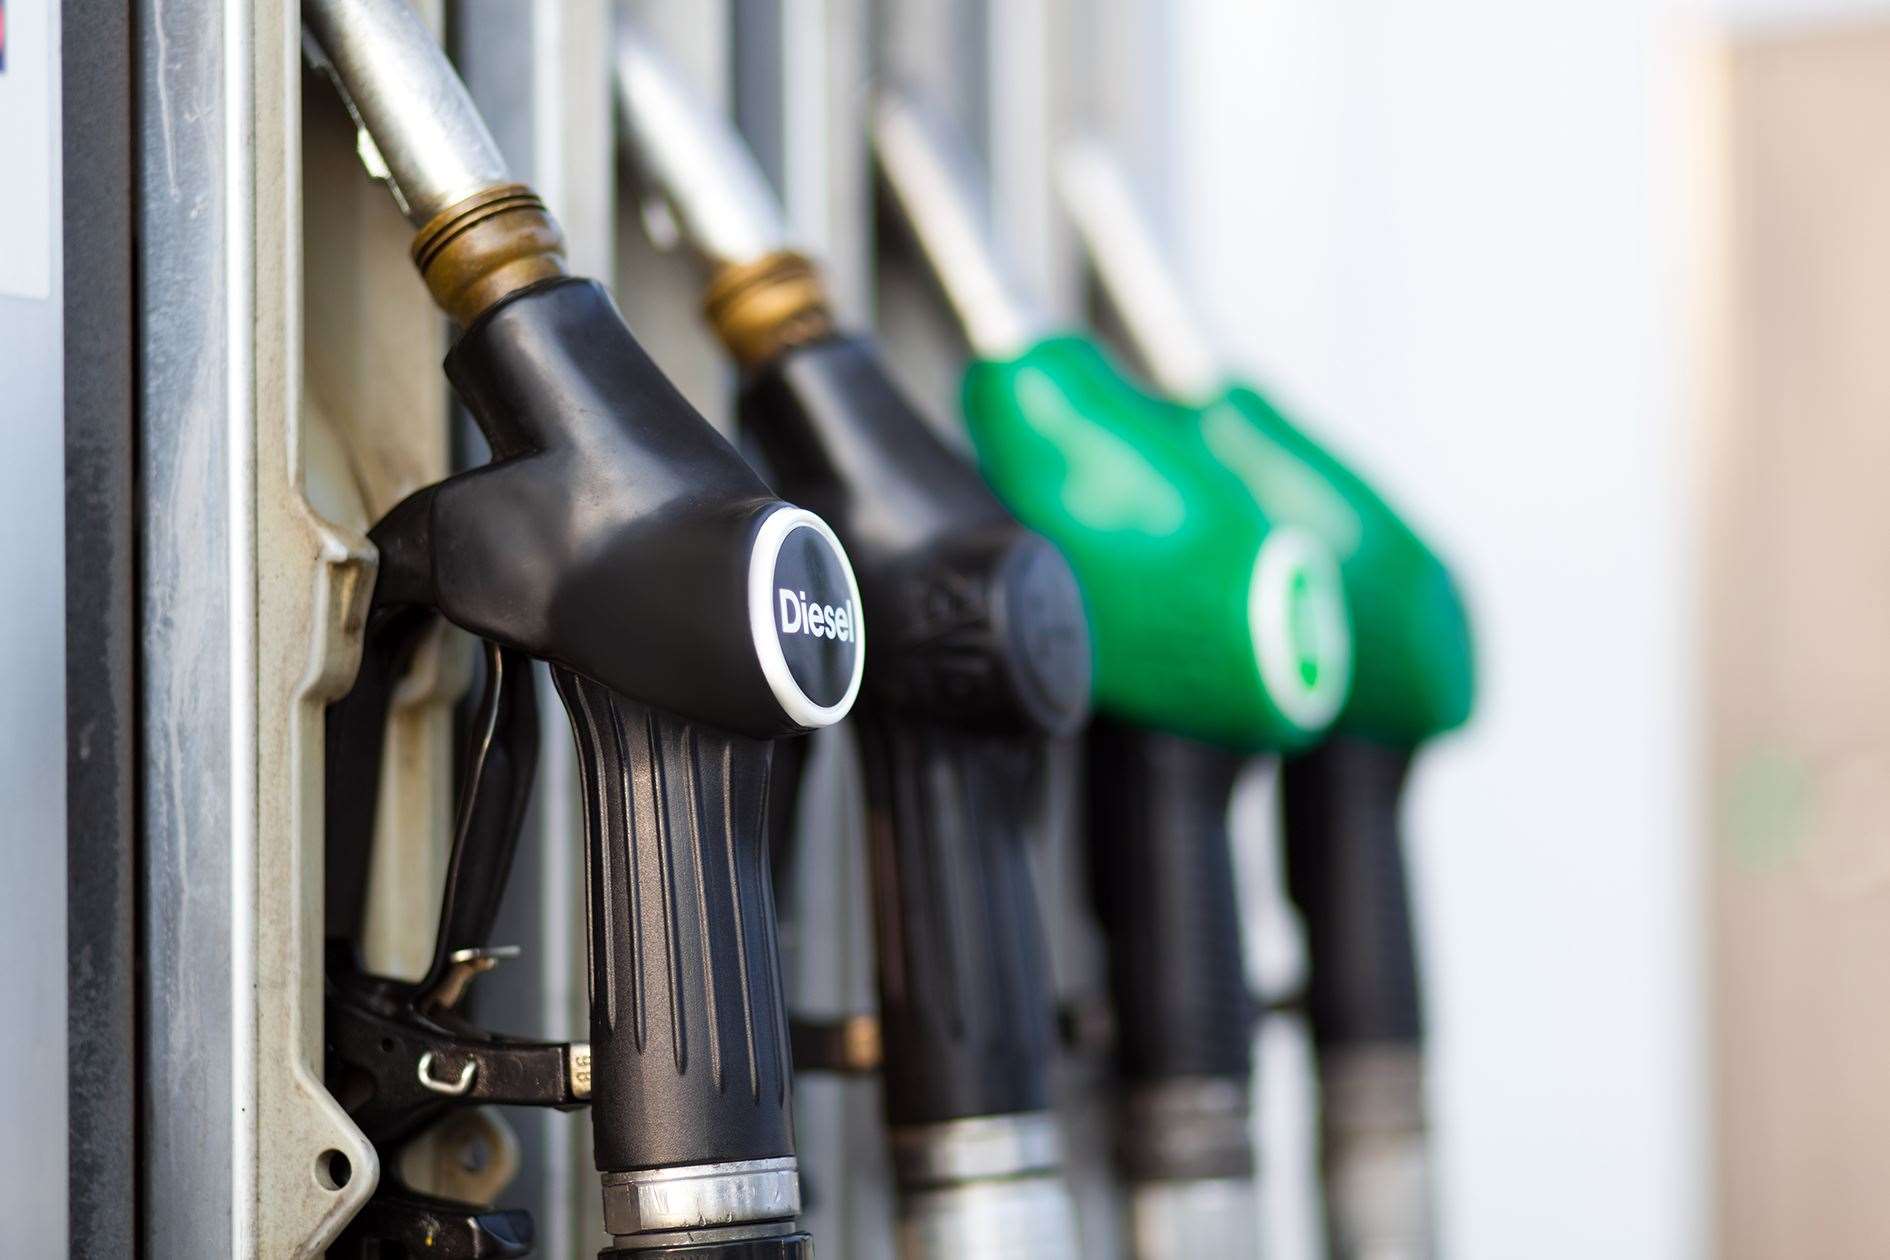 Are diesel prices too high in Inverness?